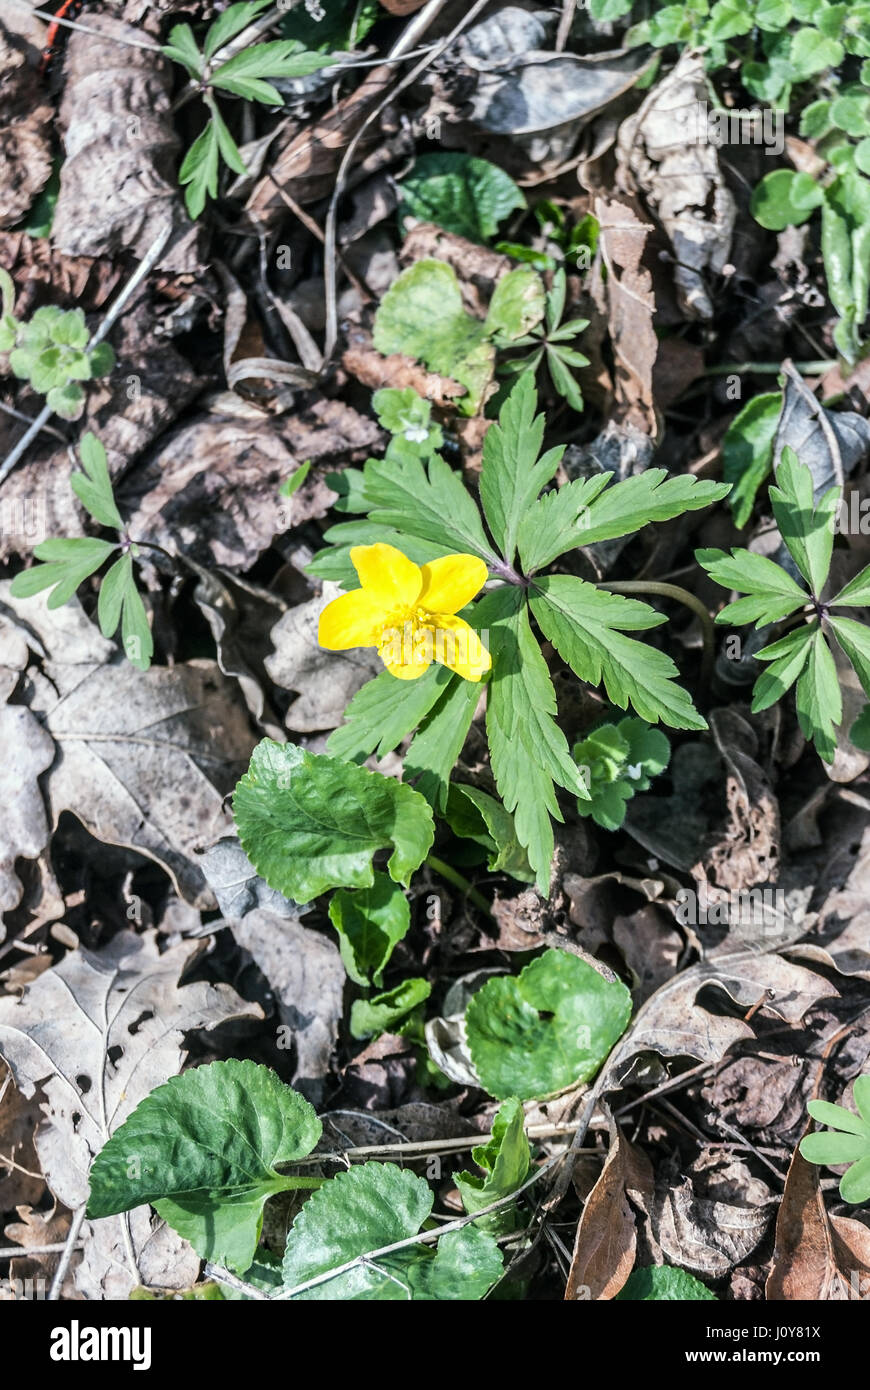 Anemone ranunculoides ( yellow wood anemone) flower in spring Palava mountains in South Moravia Stock Photo